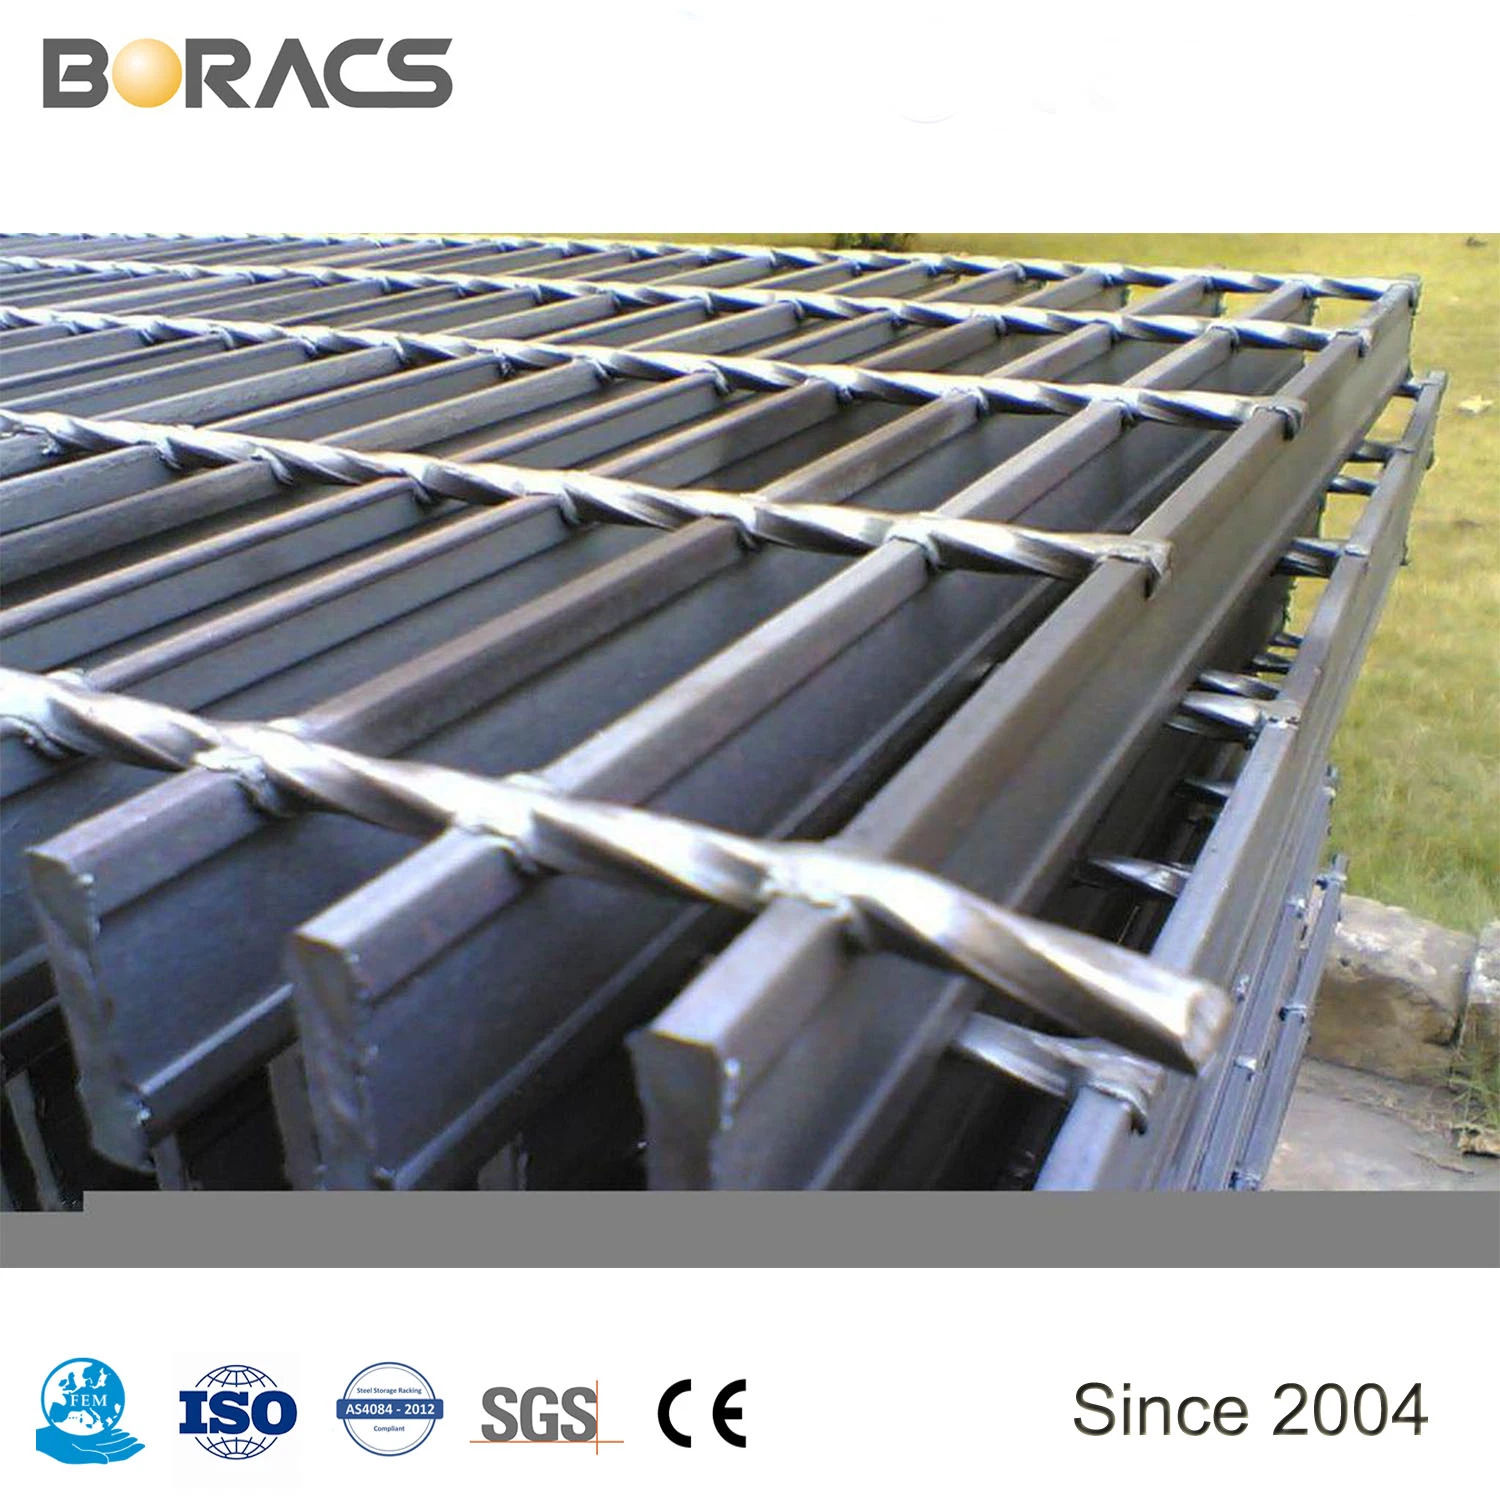 Galvanized Heavy Duty Steel Grating for Sump, Trench, Drainage Cover, Manhole Cover, Stair Tread, Floor Drain